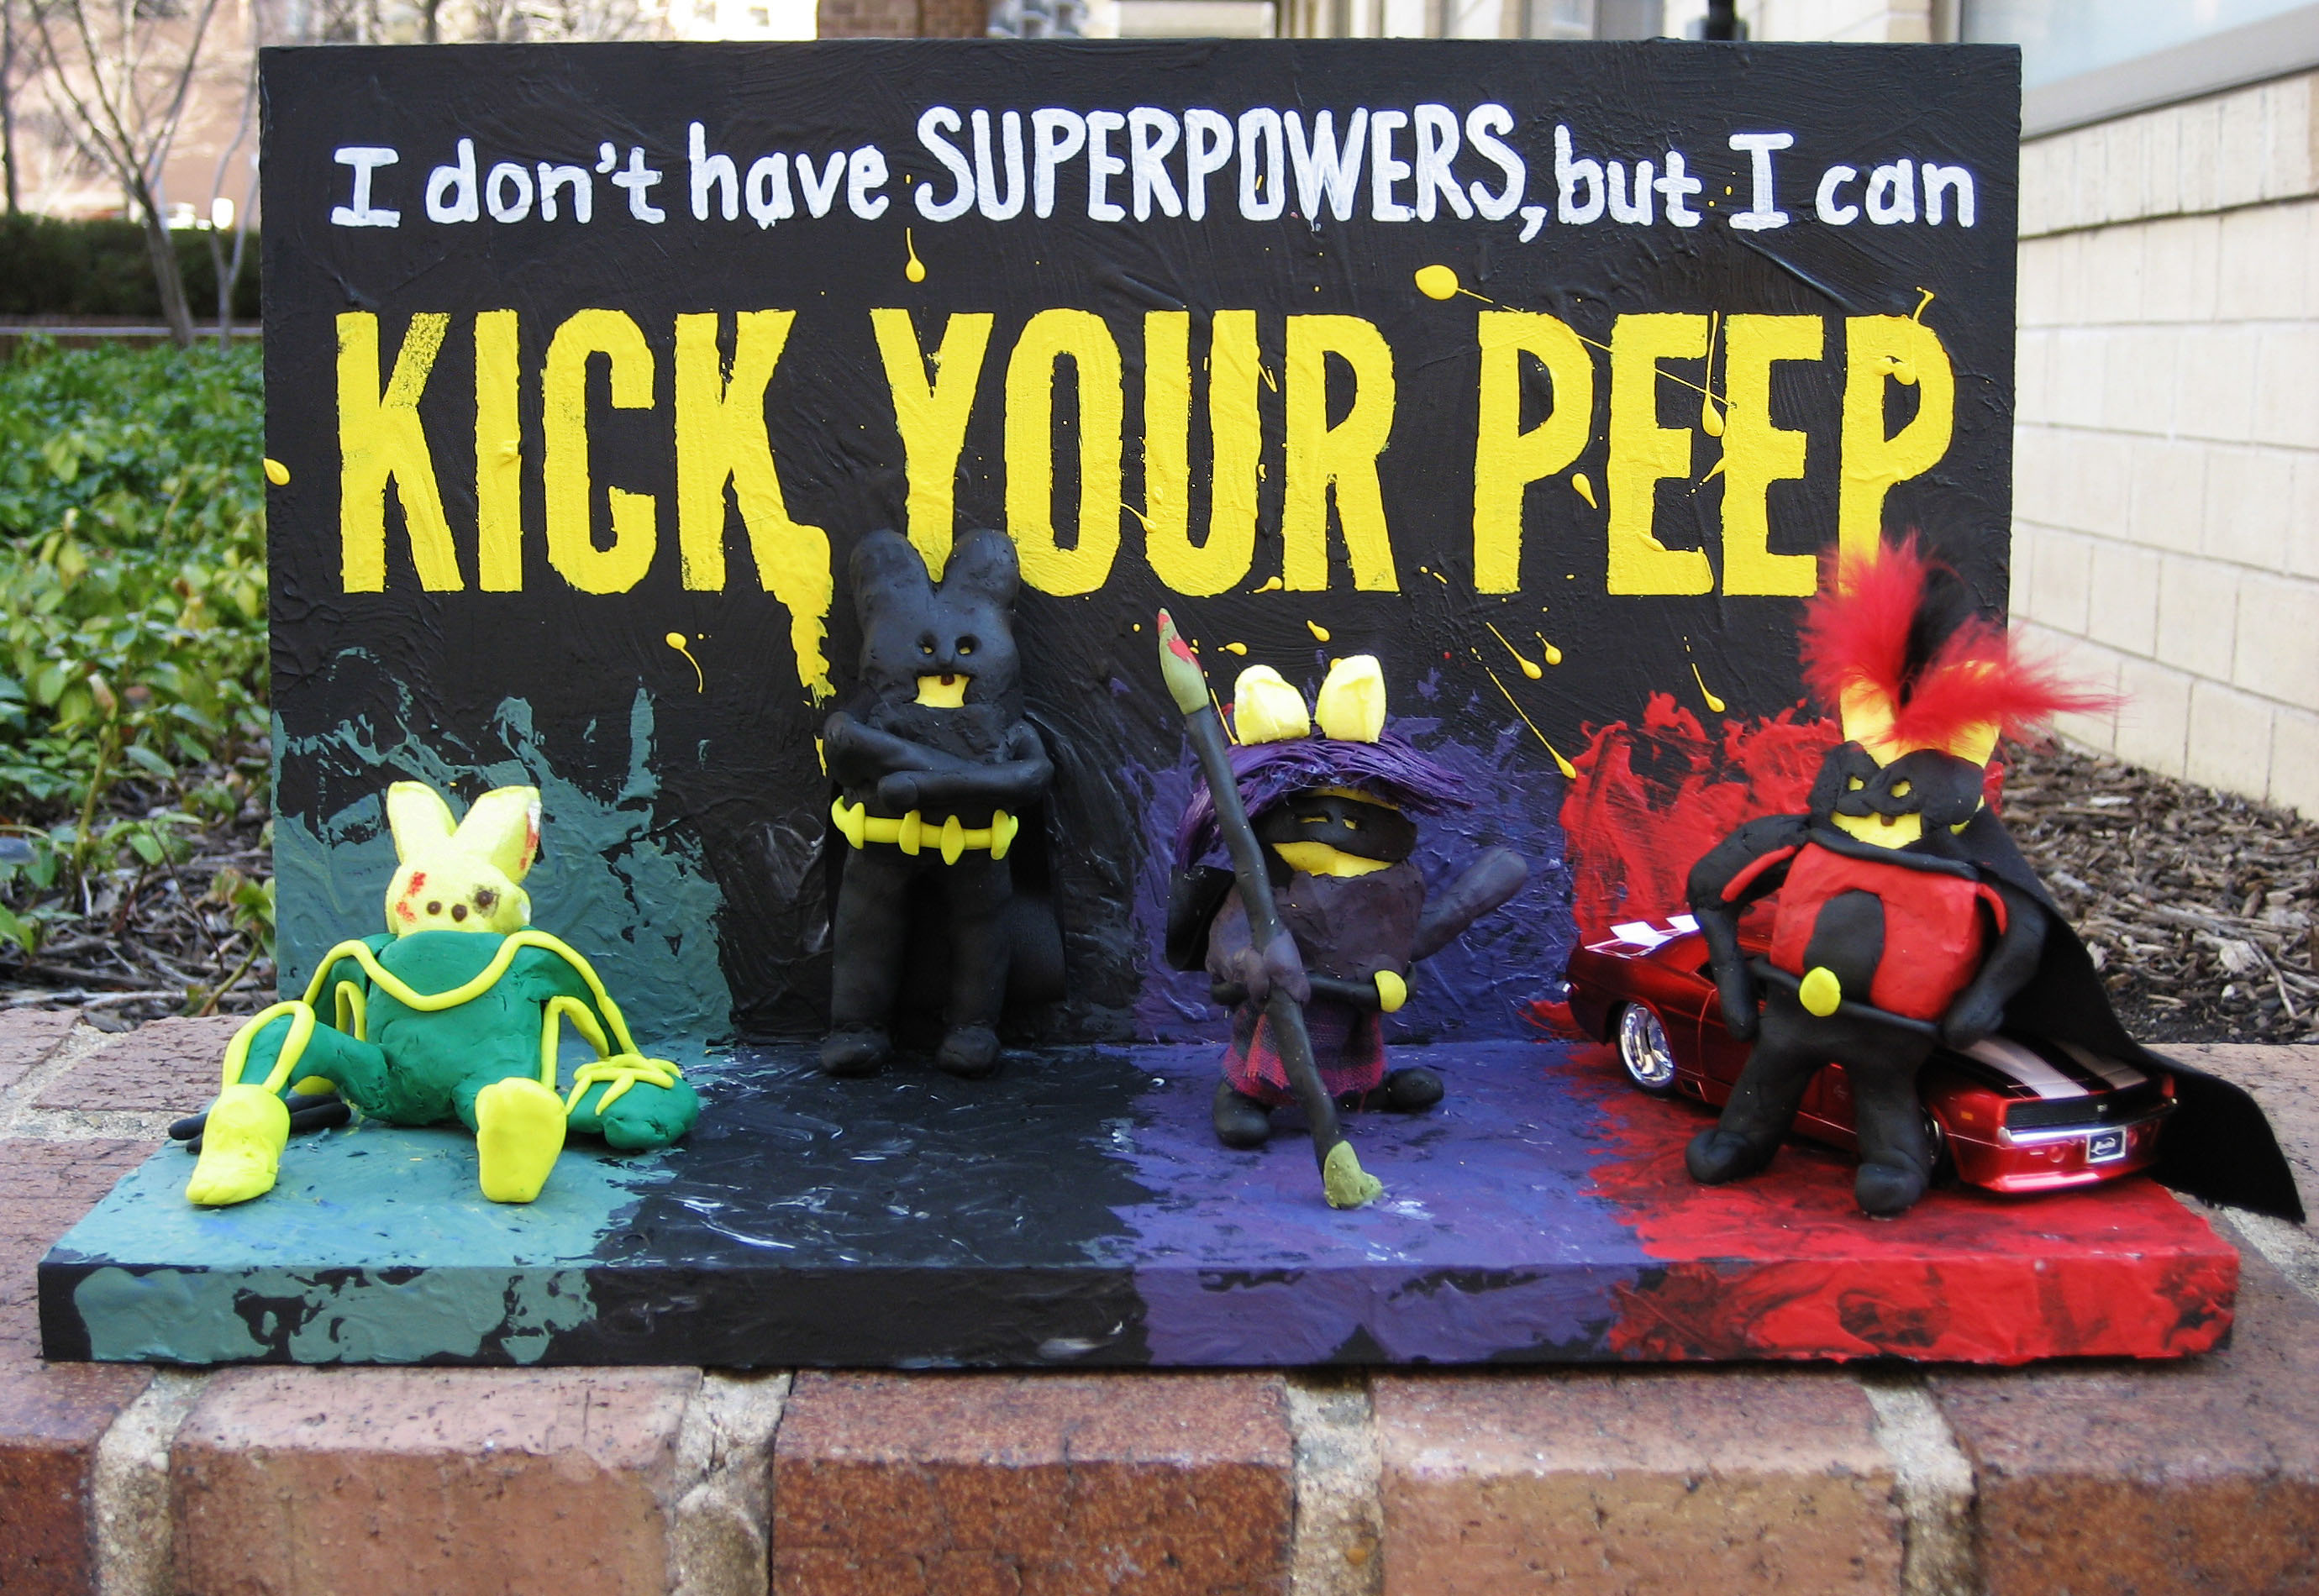 peeps diorama of characters from movie Kickass